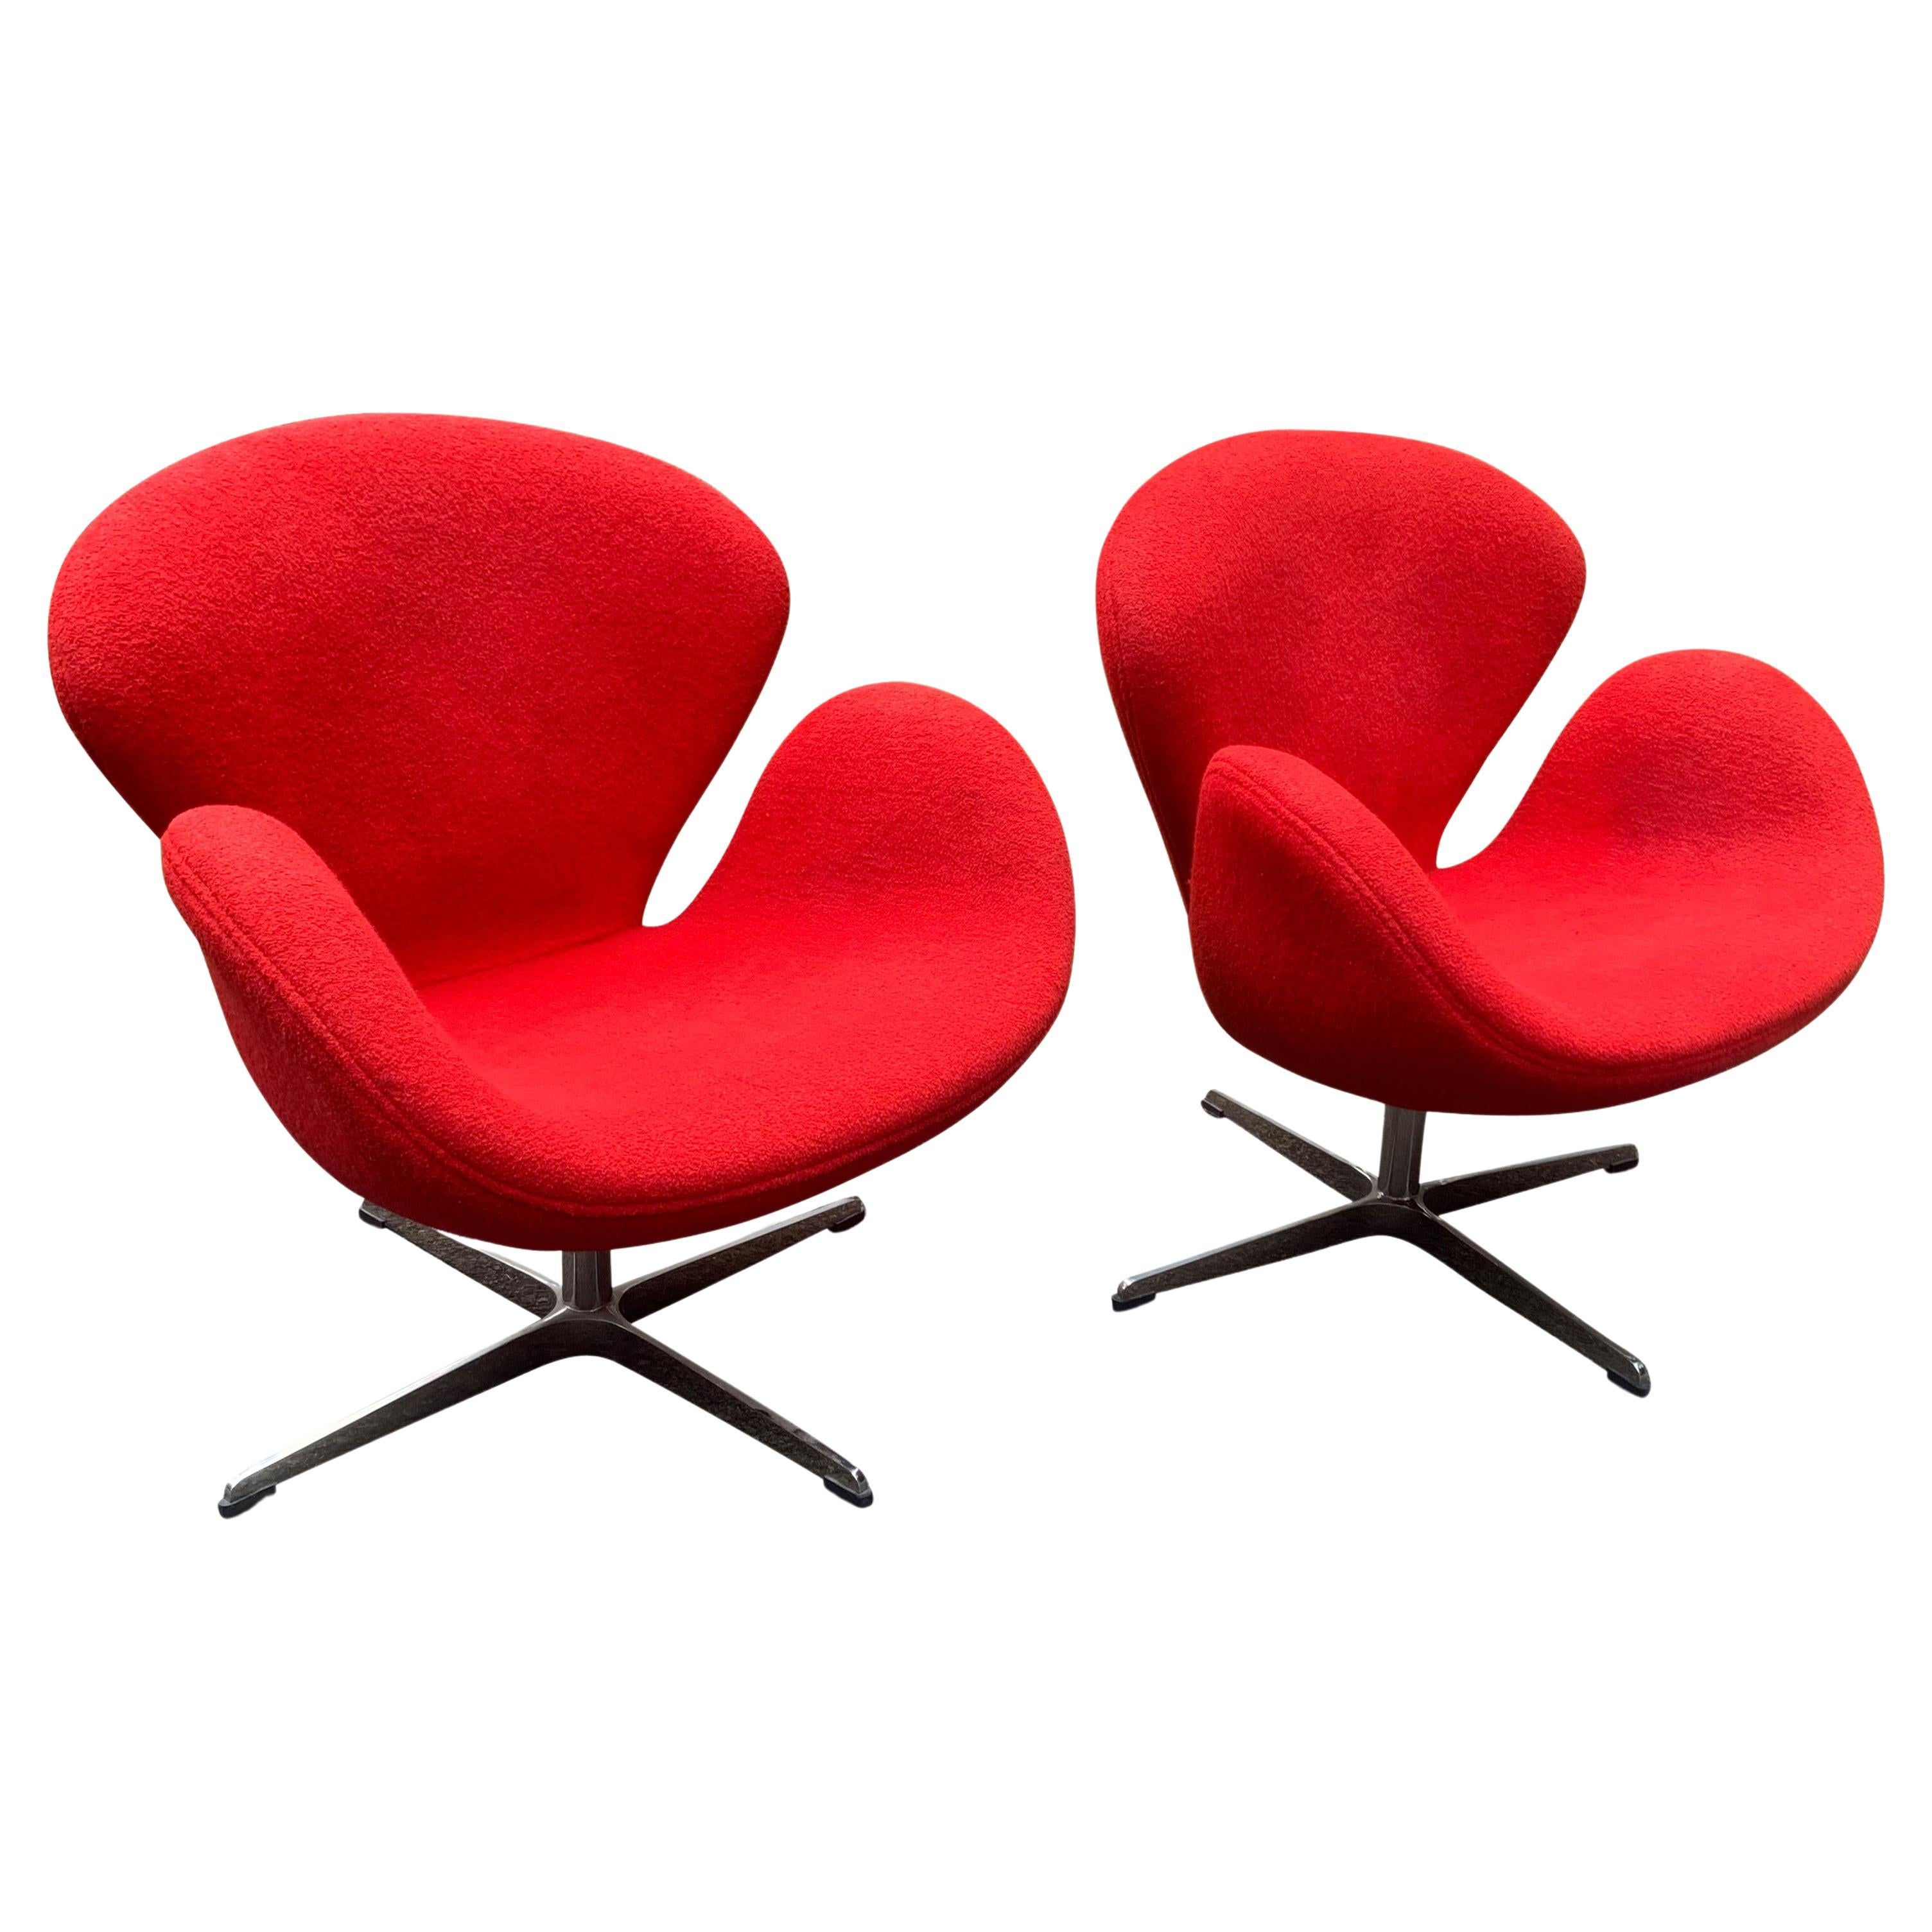 Pair of Vintage Mid Century Modern Style Swan Chairs after Arne Jacobsen